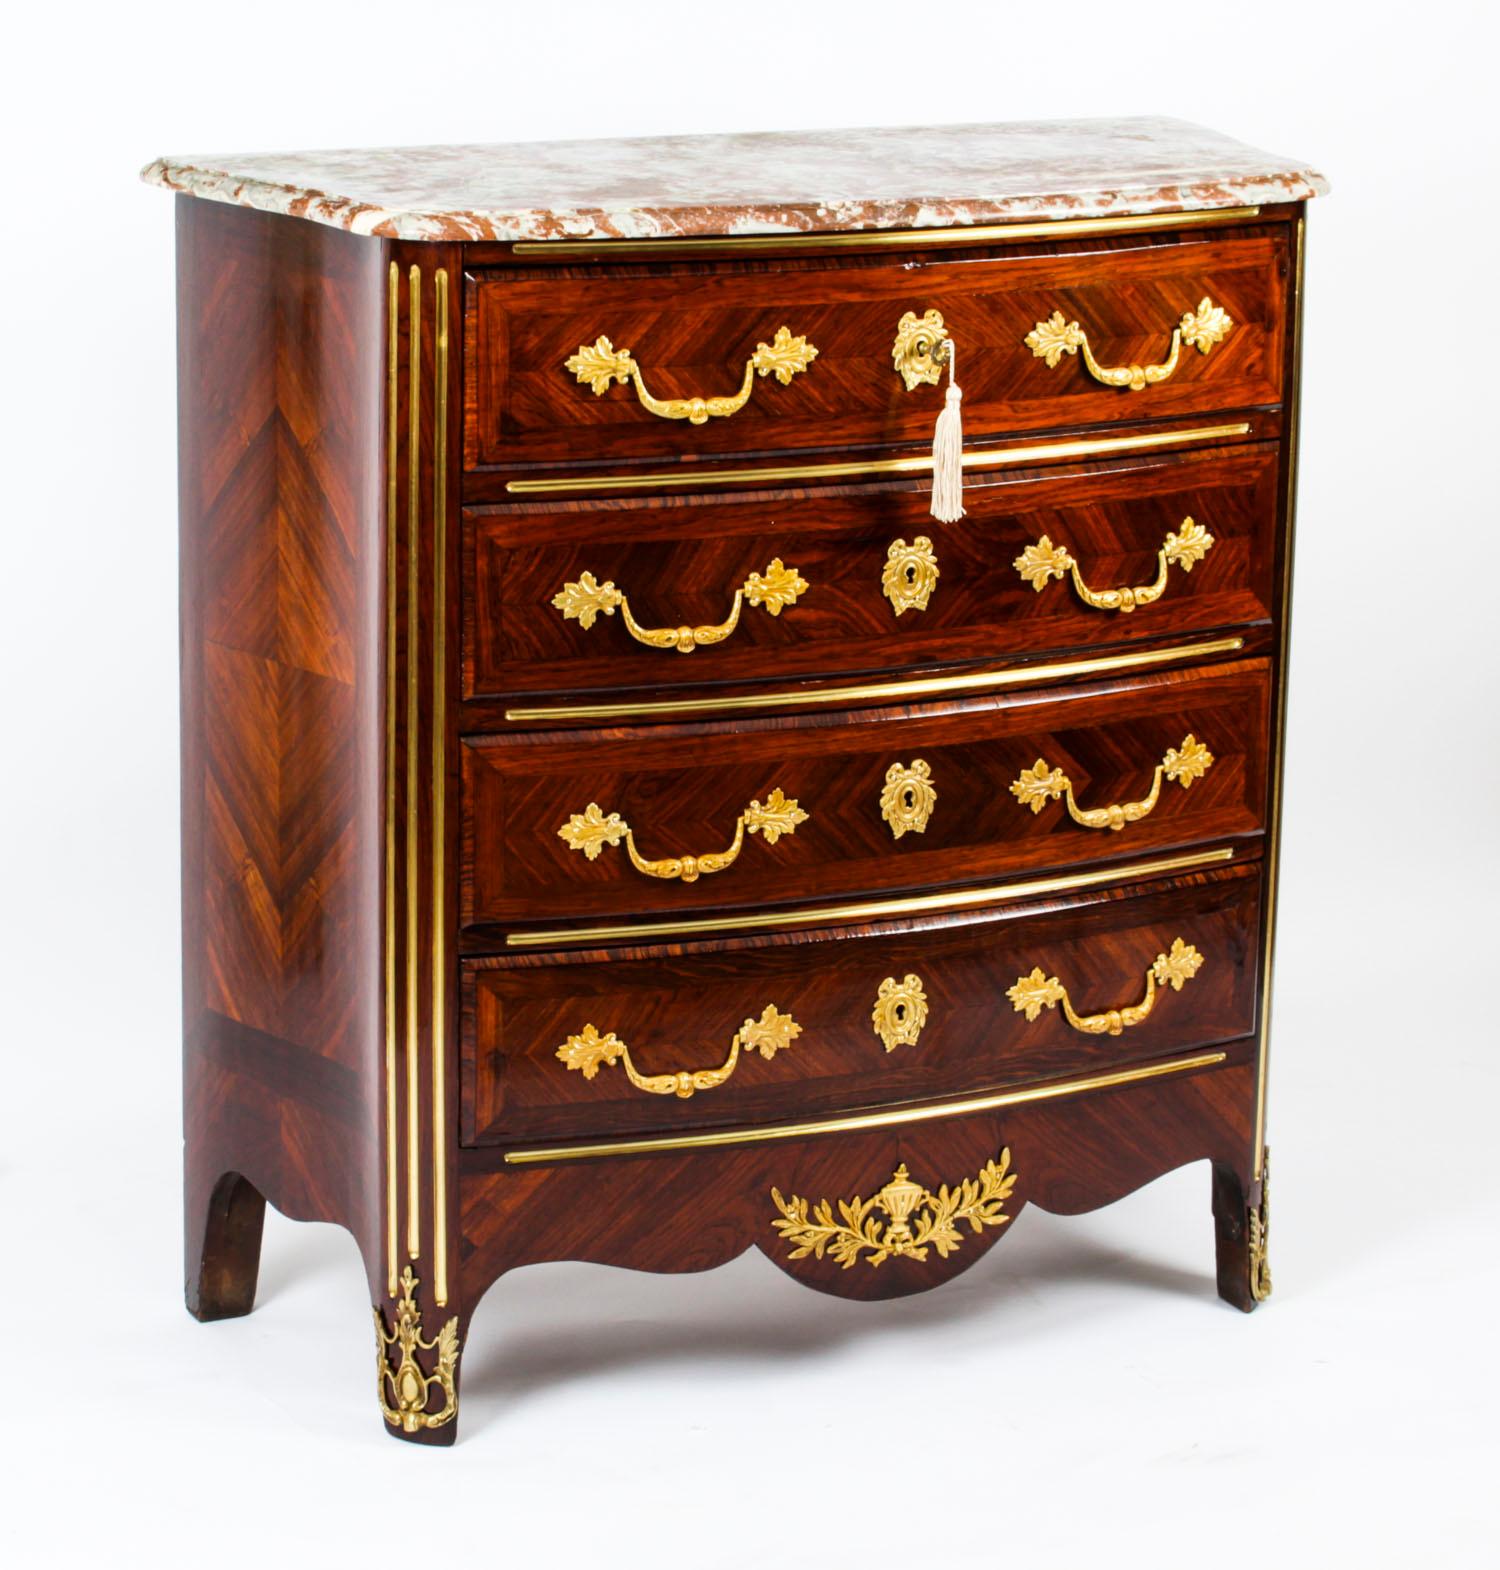 Antique Marble Topped Ormolu-Mounted Goncalo Alves Commode Chest, 19th Century 14